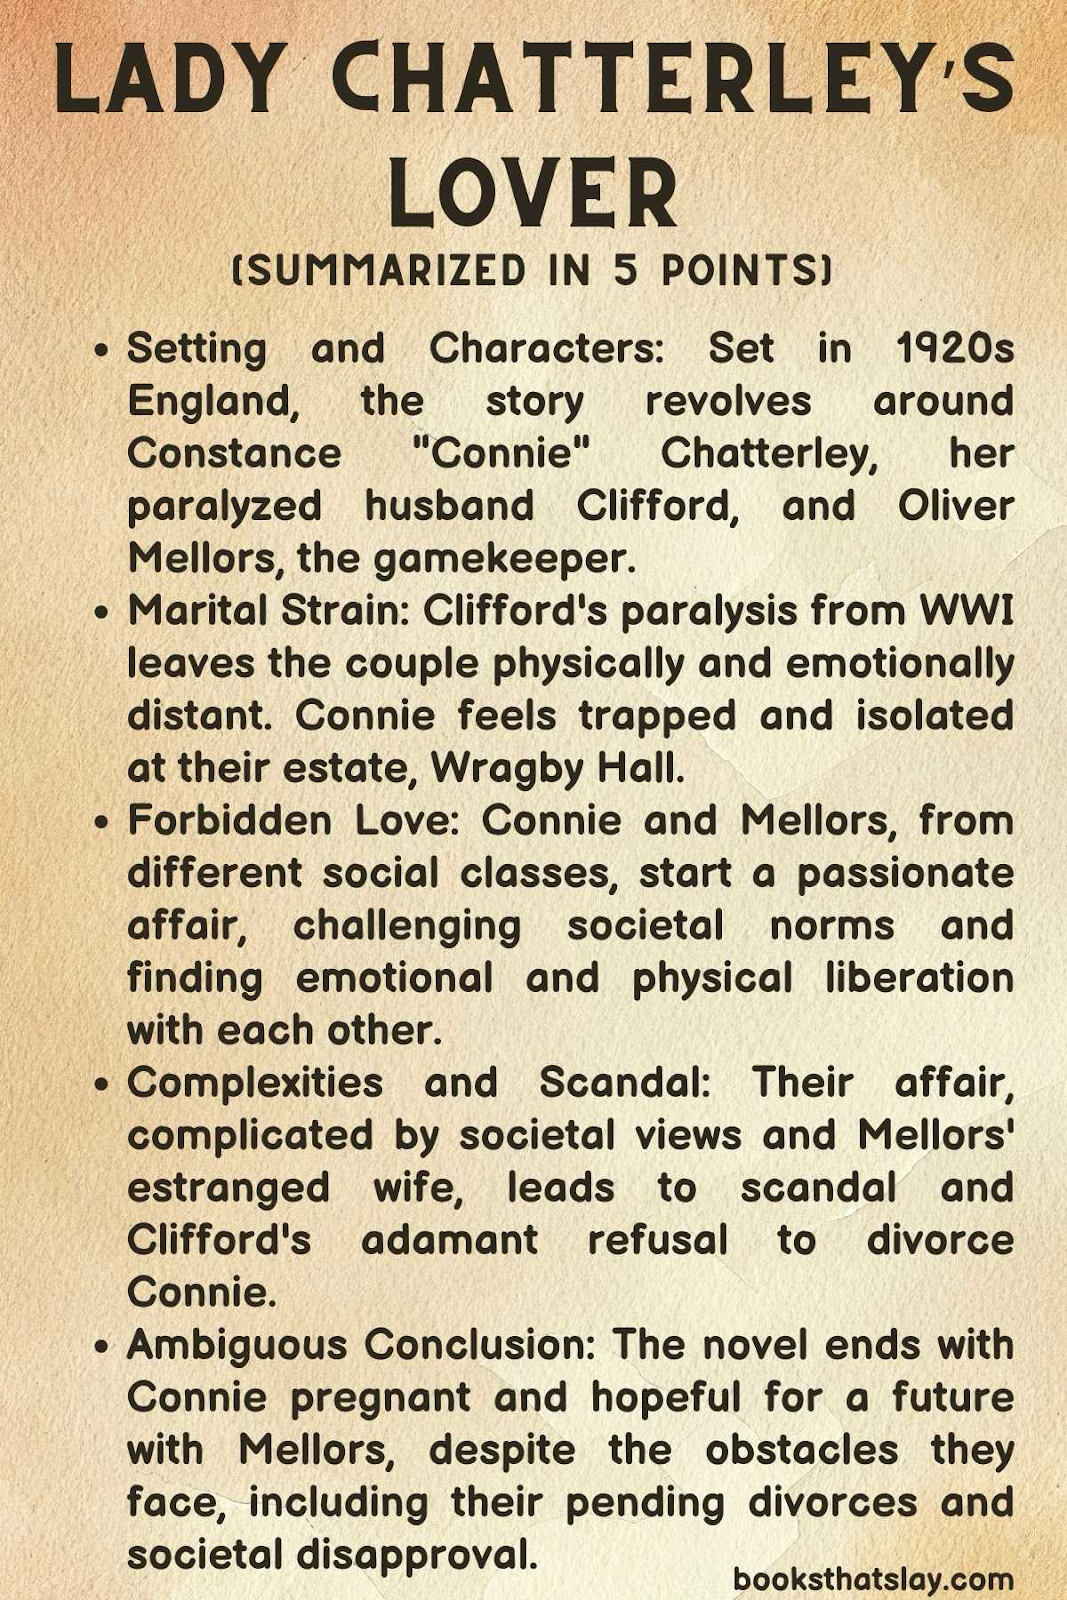 Lady Chatterley's Lover Summary and Key Themes